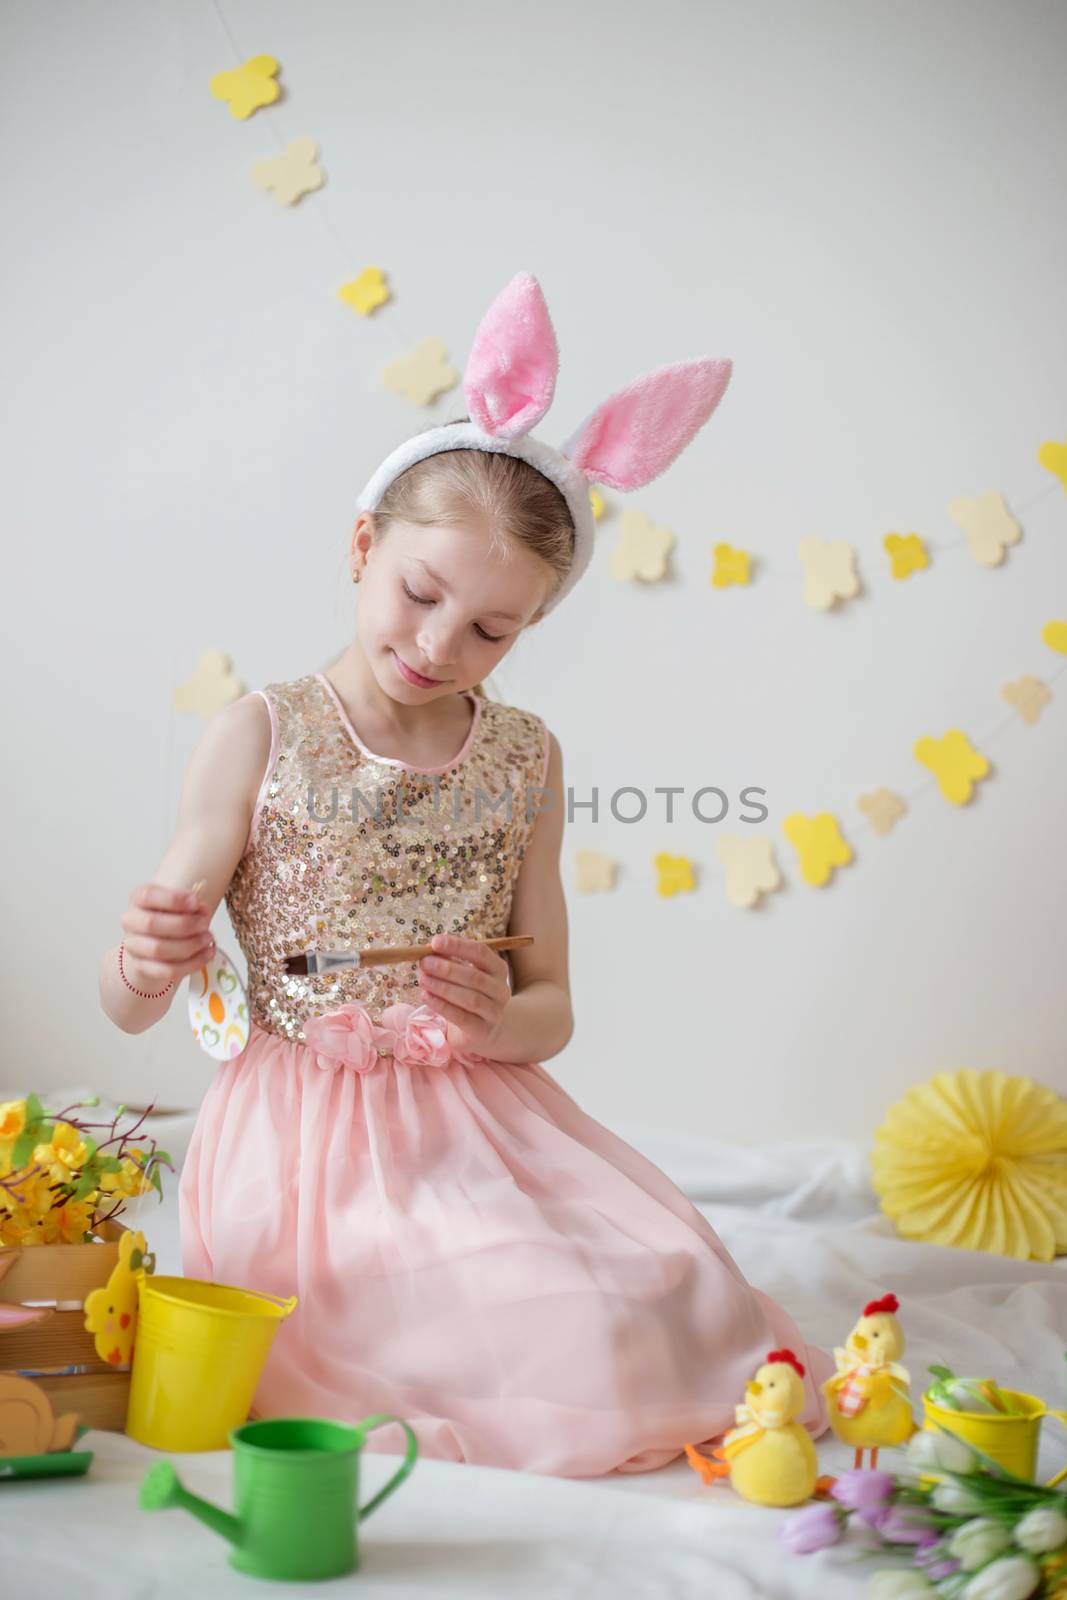 Cute little girl with bunny ears painting eggs, Easter decoration